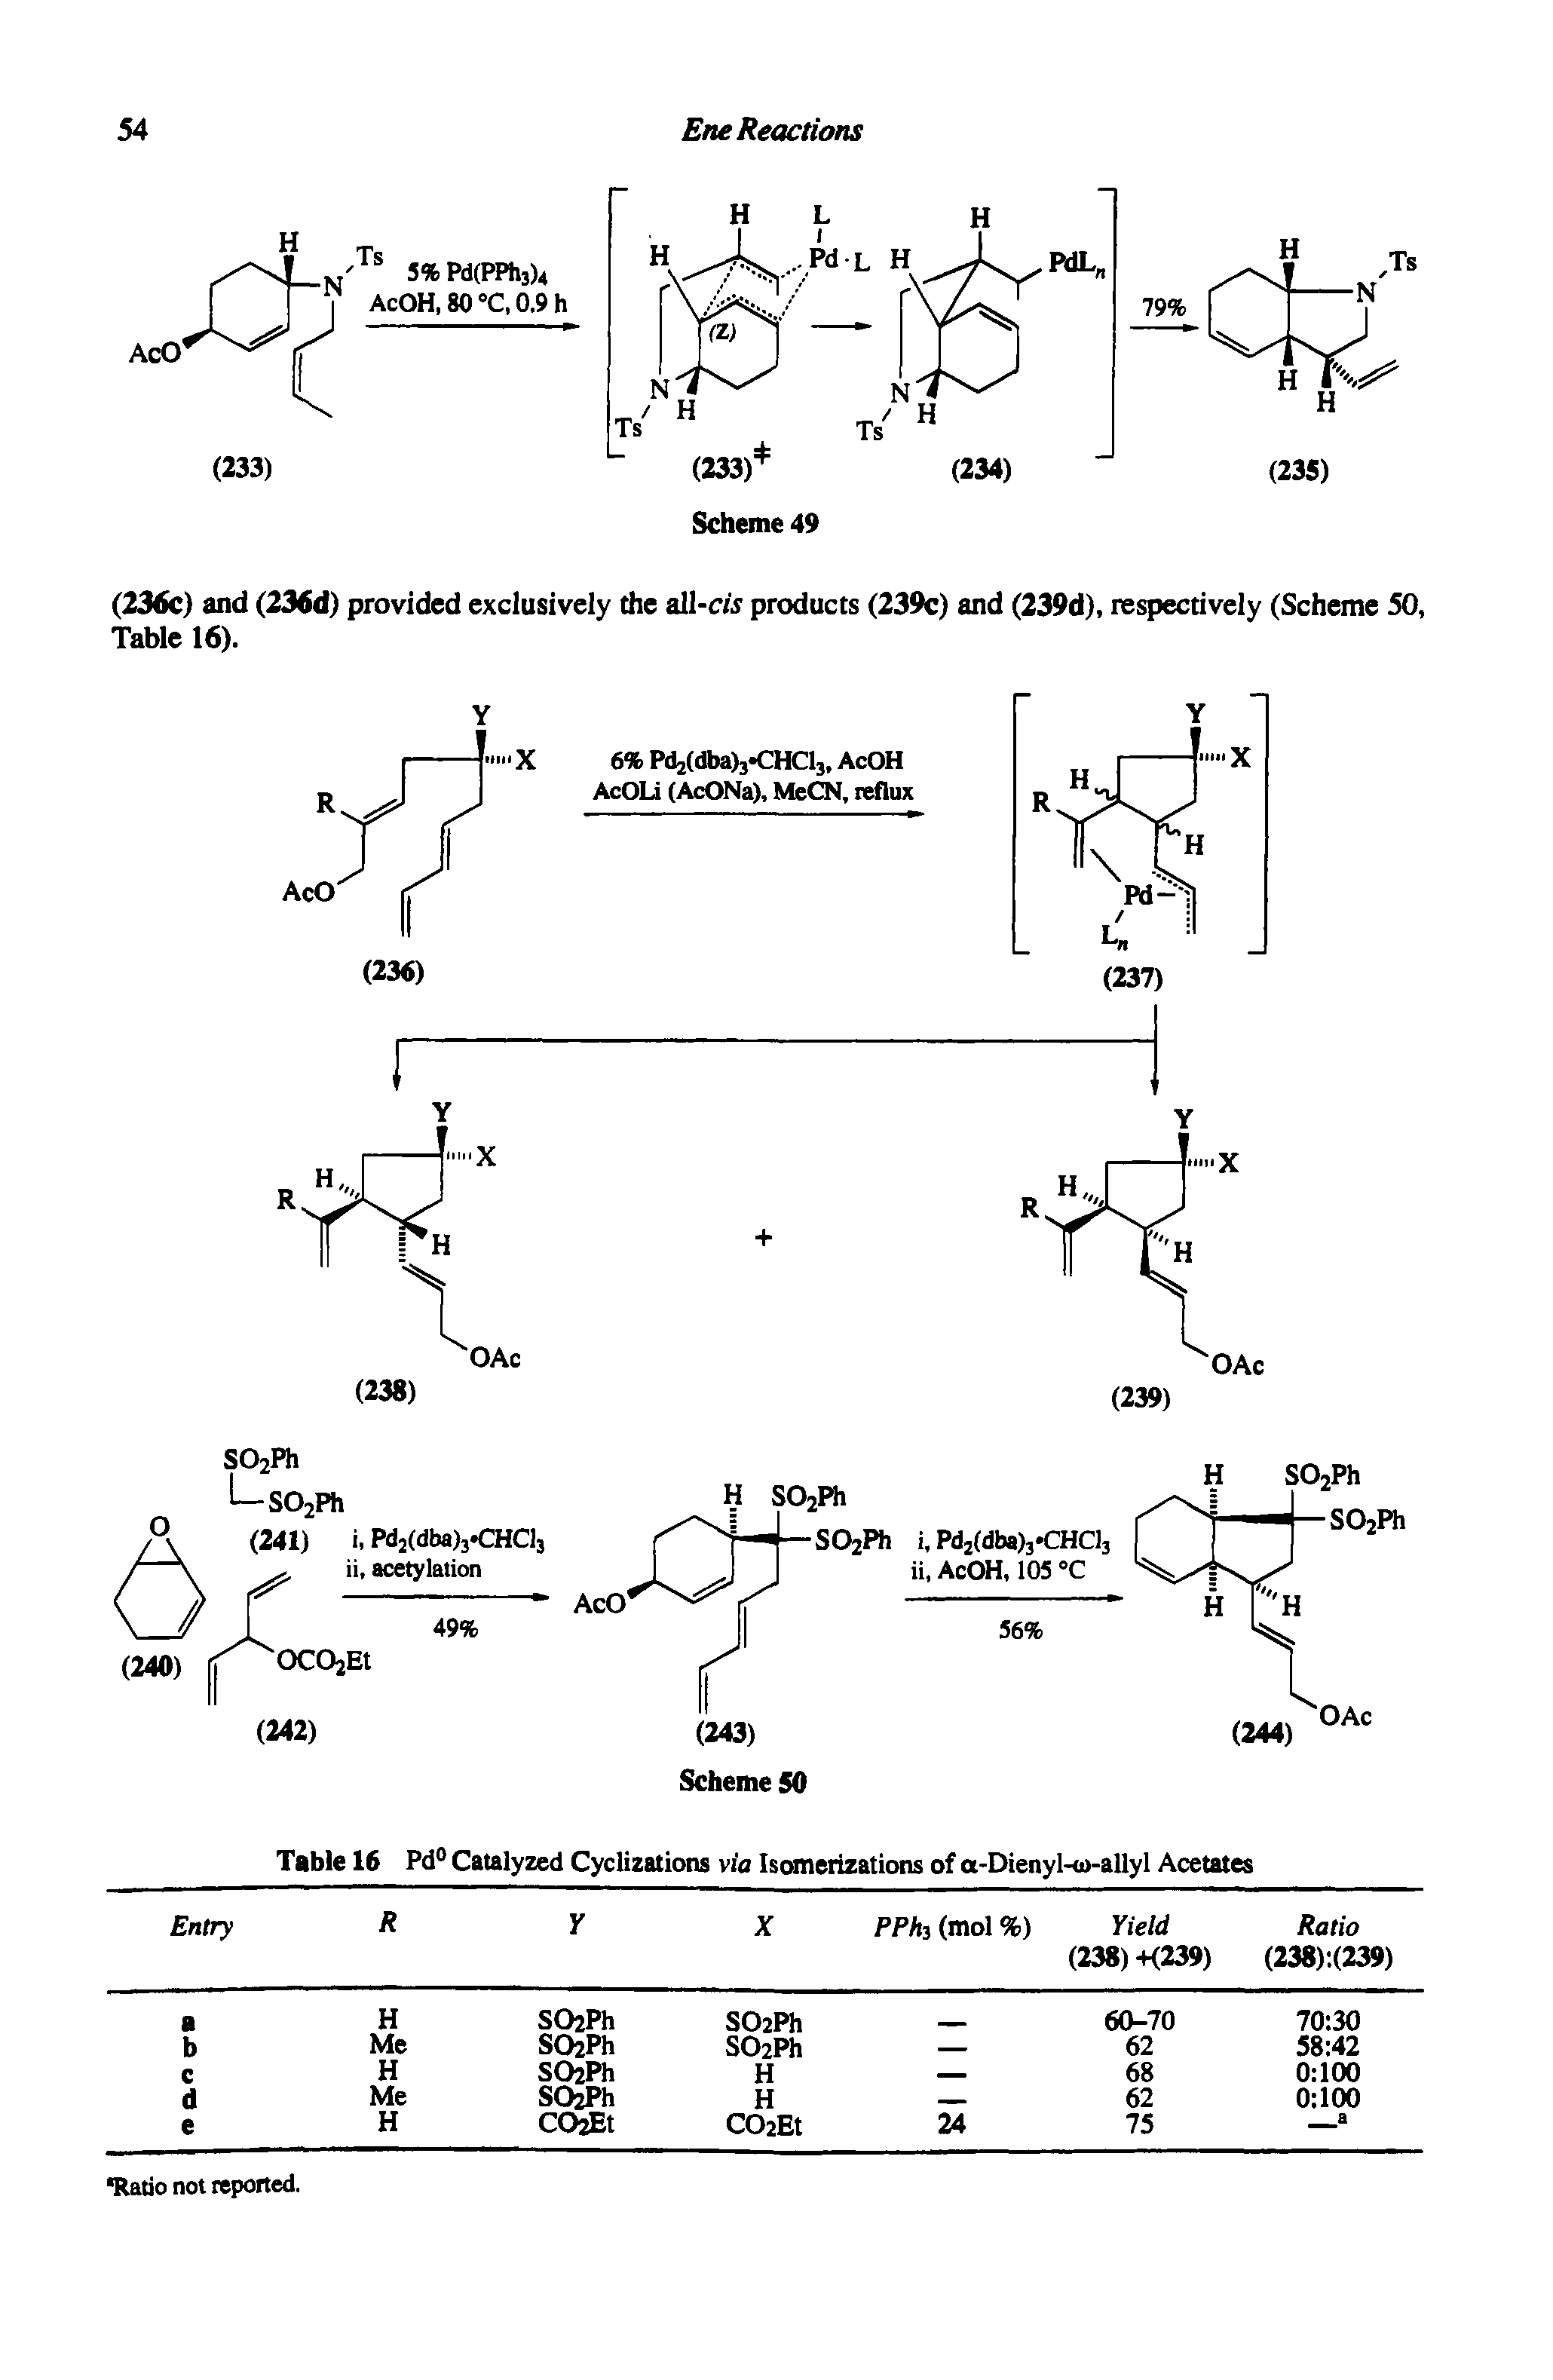 Table 16 Pd° Catalyzed Cyclizations via Isomerizations of a-Dienyl-<d-allyl Acetates...